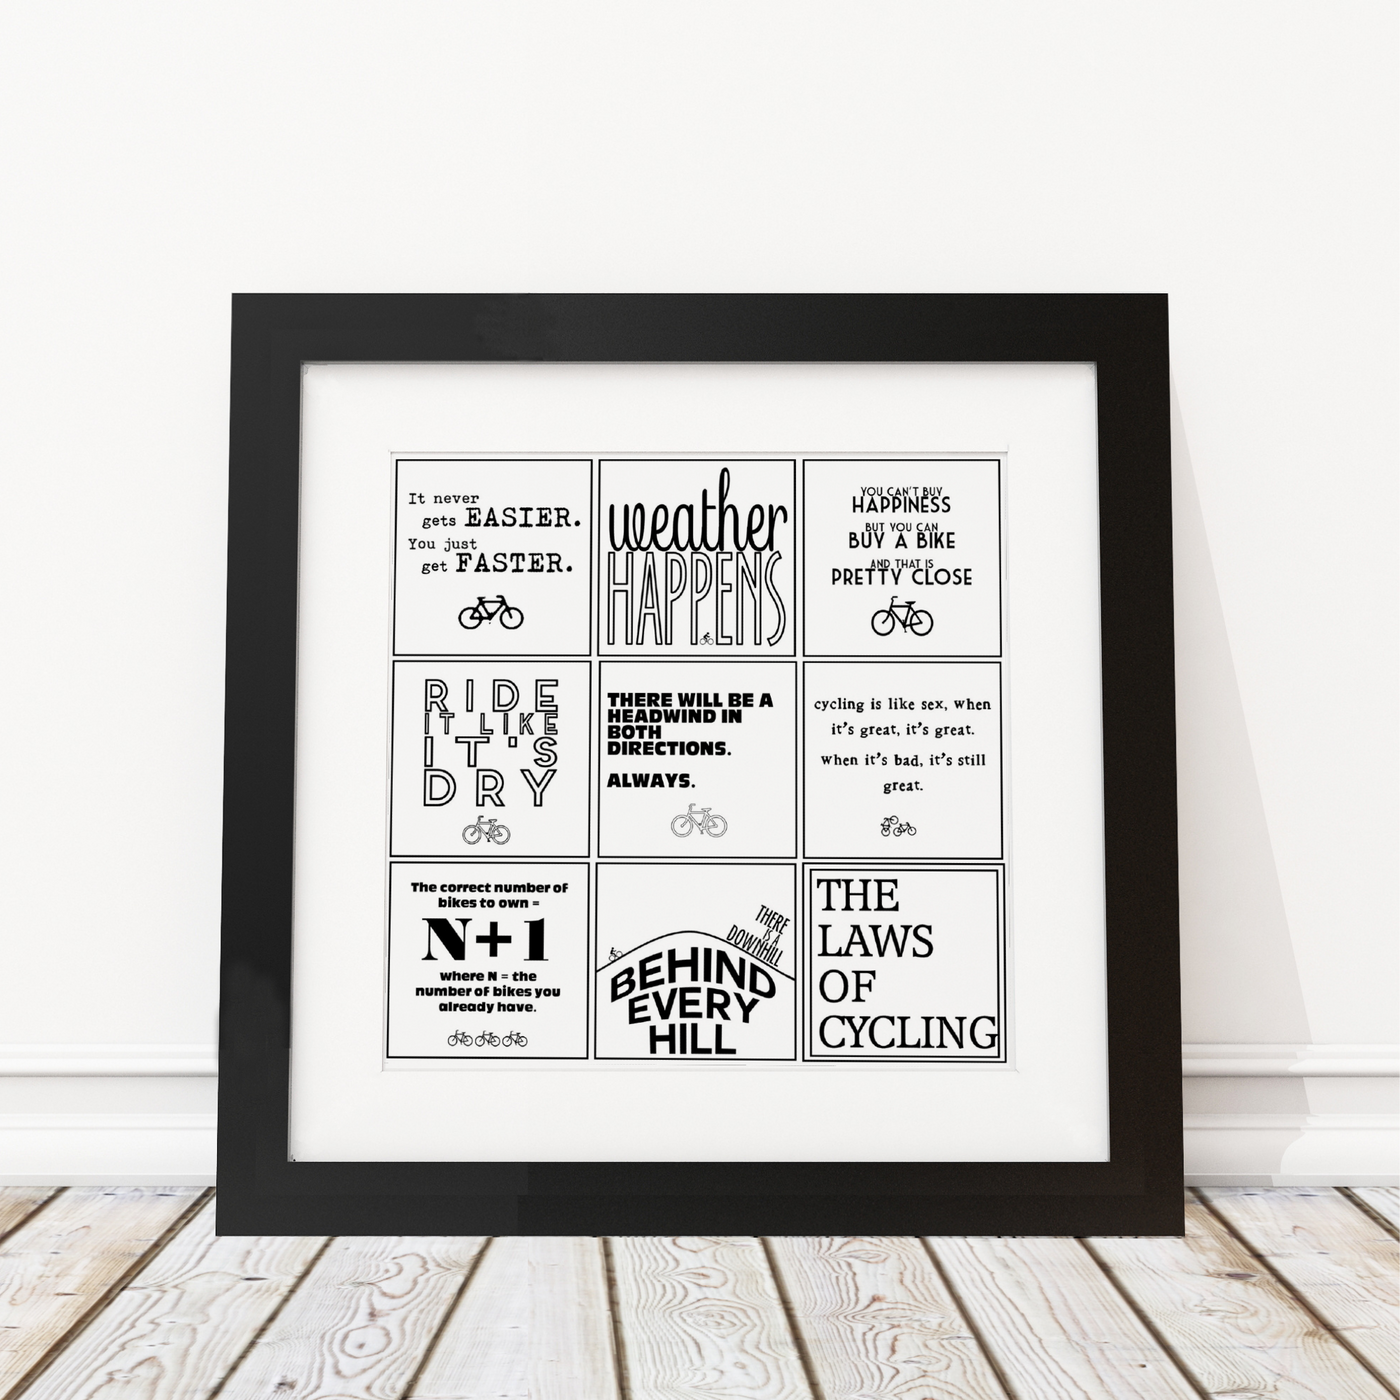 The Laws of Cycling - Framed Print